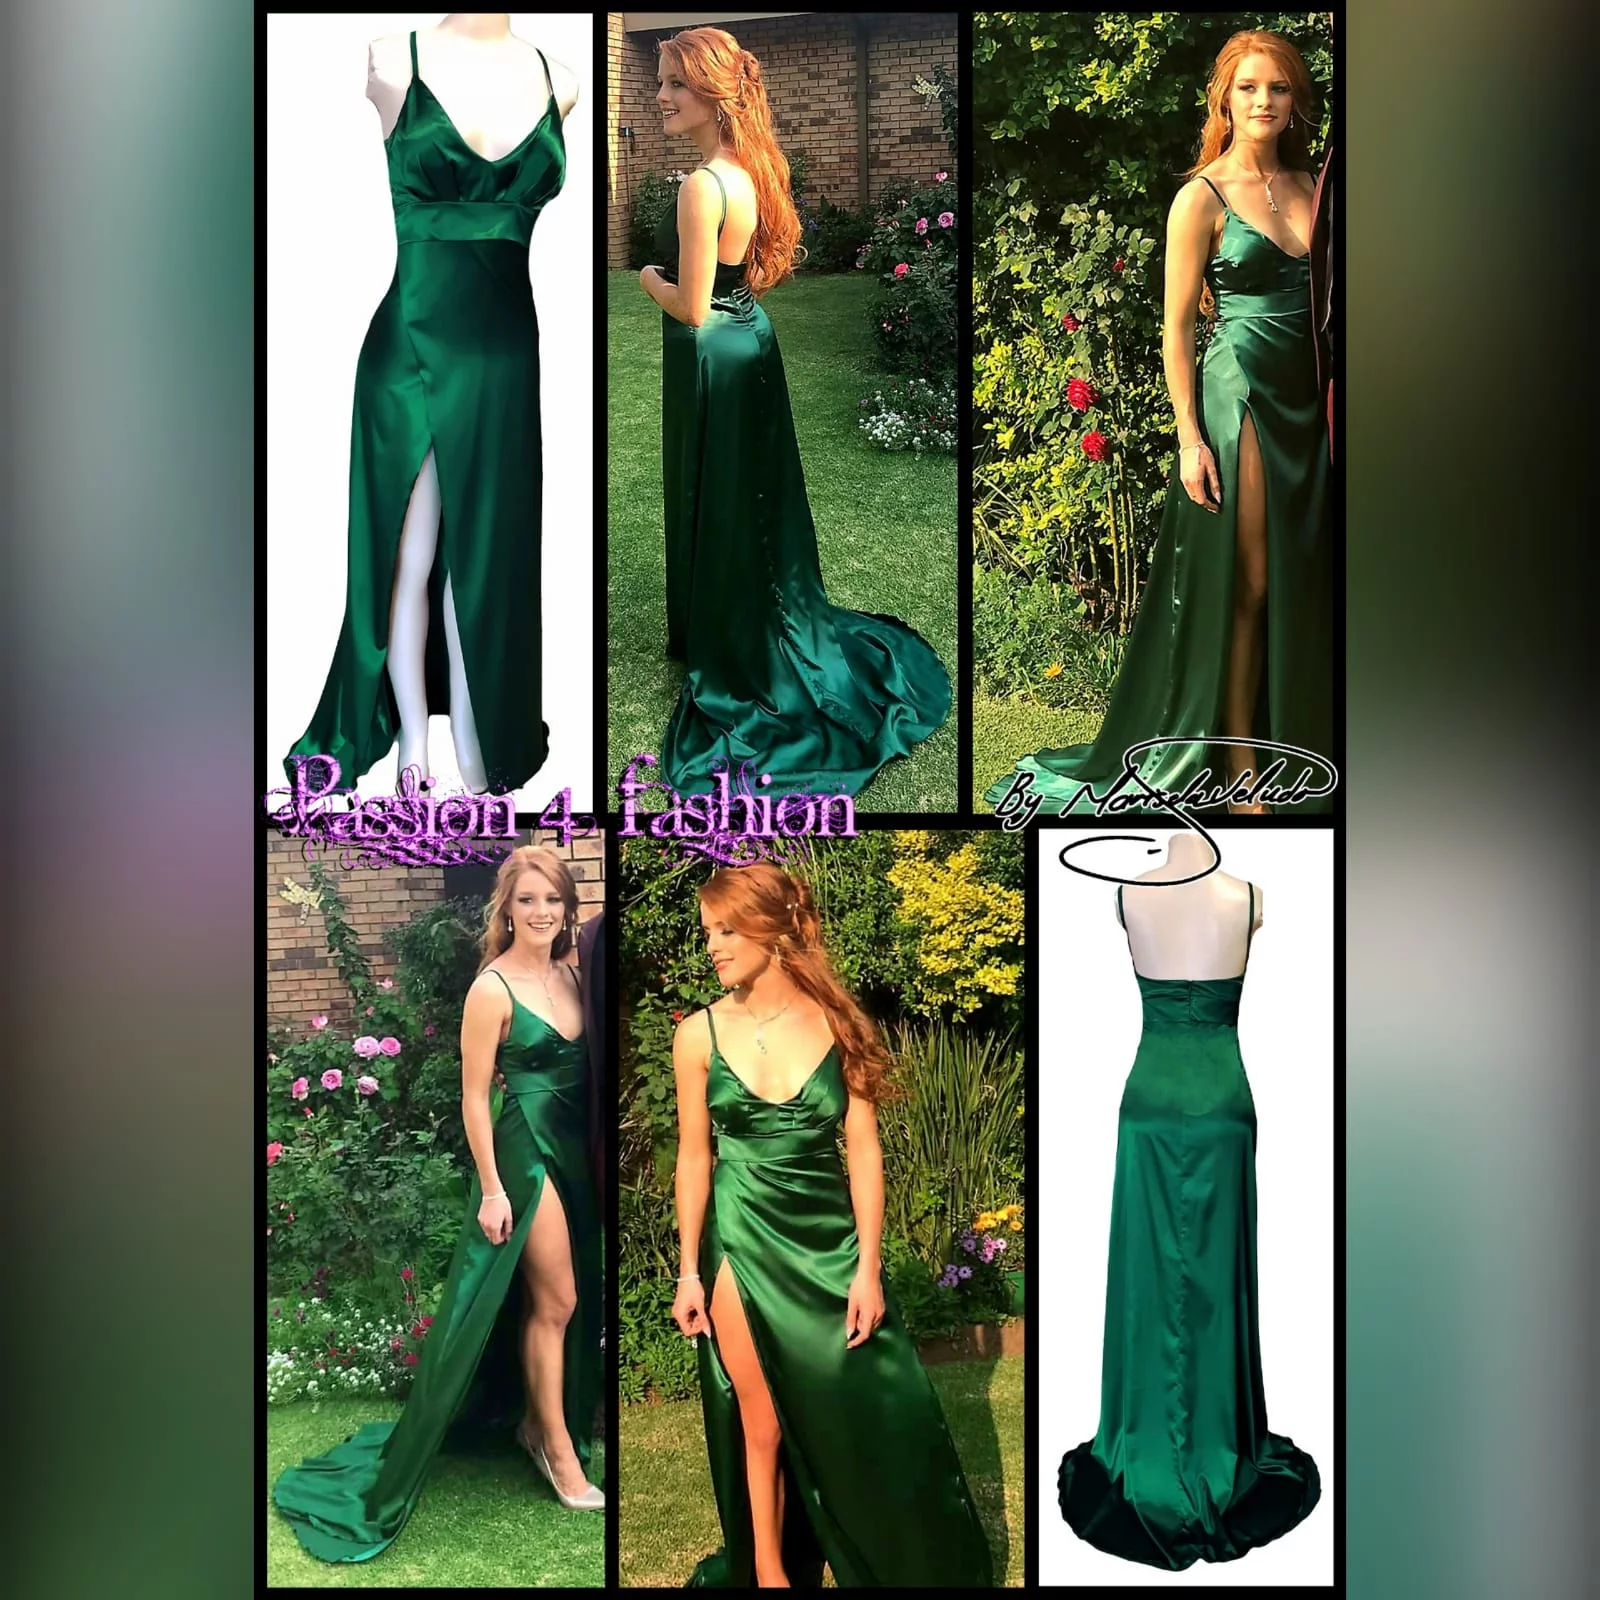 Emerald green long satin matric farewell dress 6 emerald green long satin matric farewell dress. With a high crossed slit and a train.